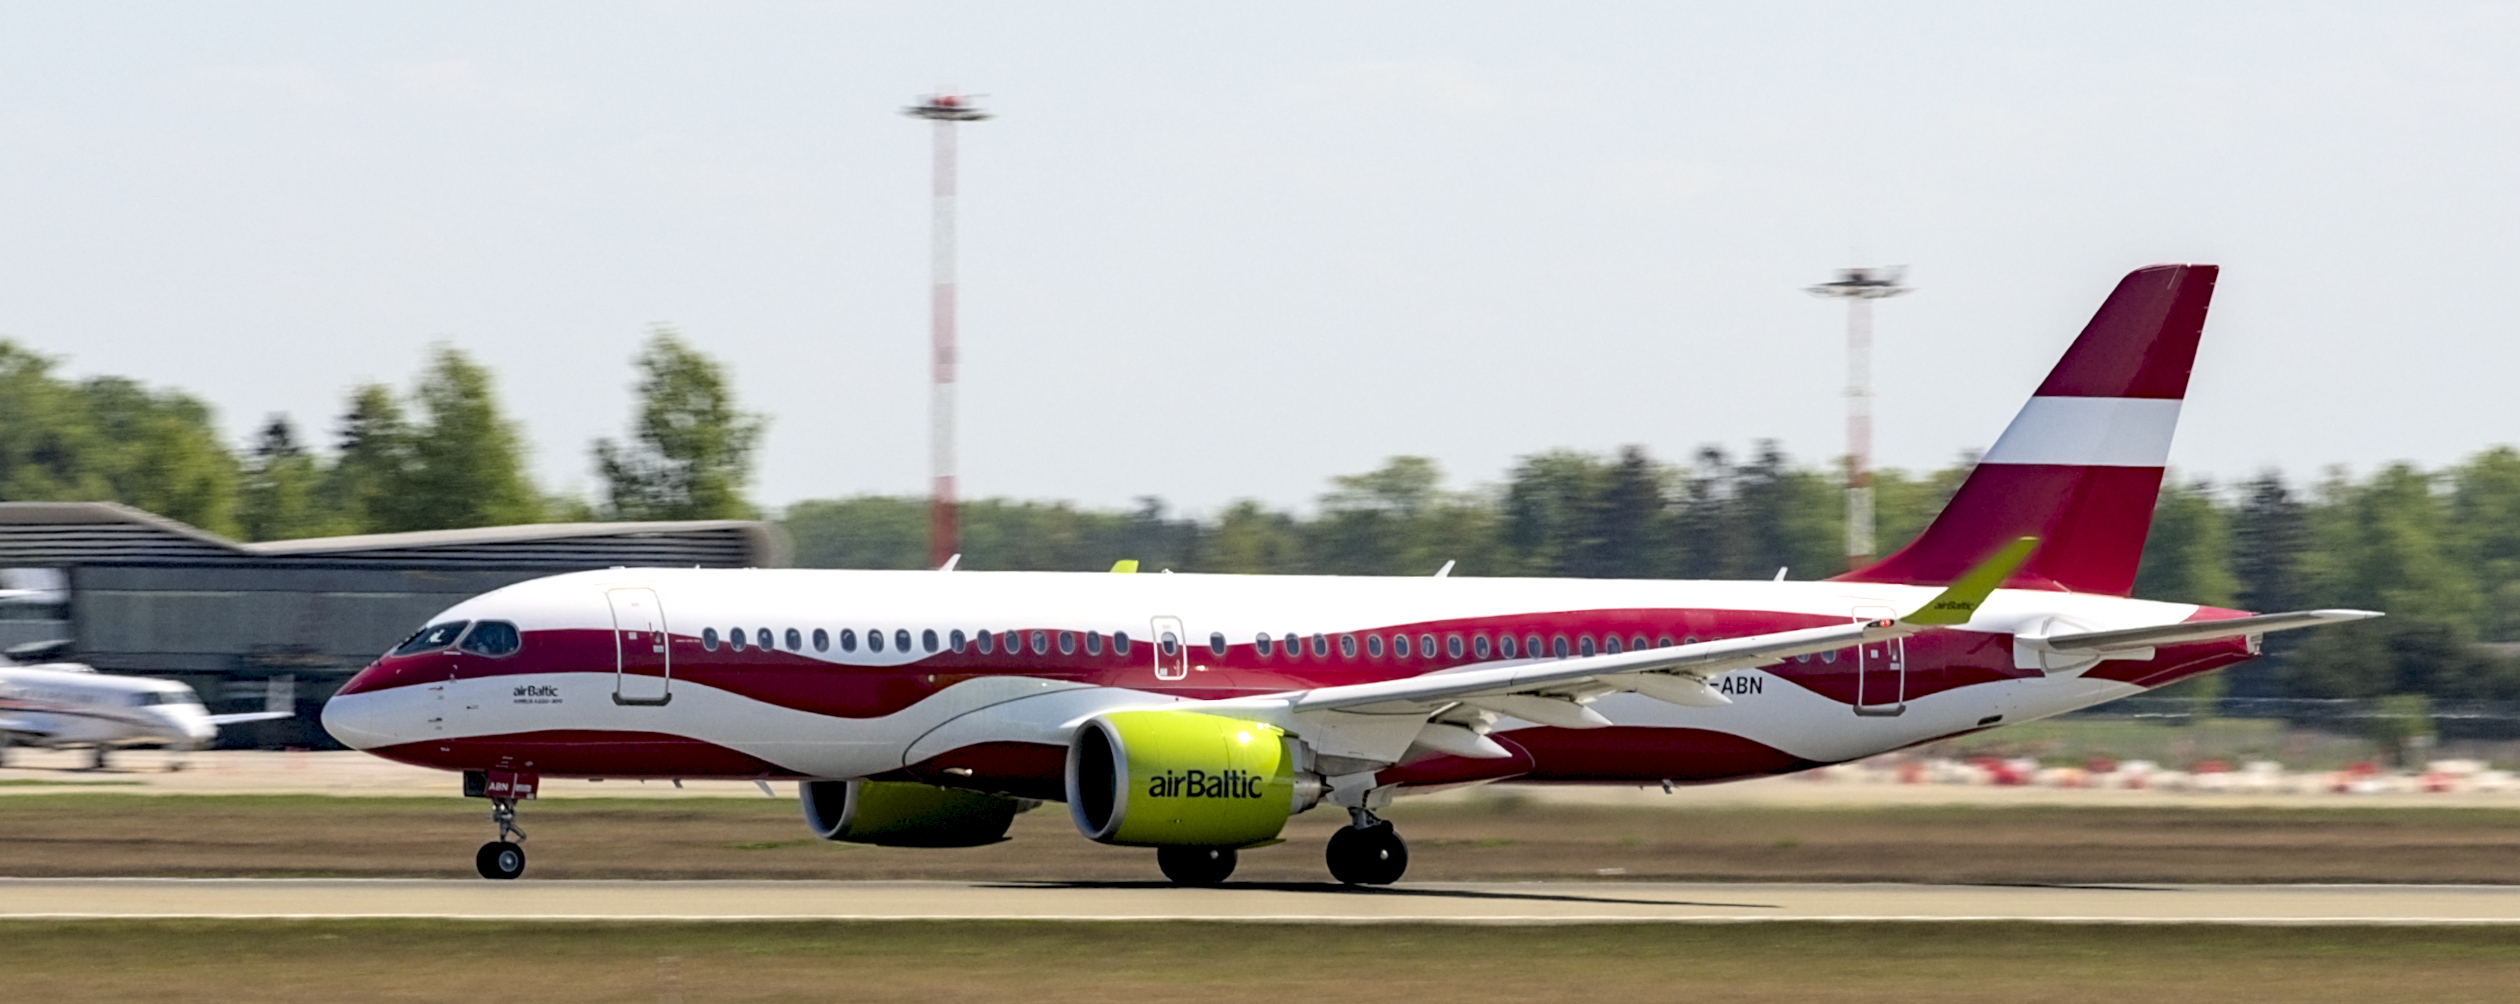 Airbaltic A220 YL-ABN Latvian flag livery